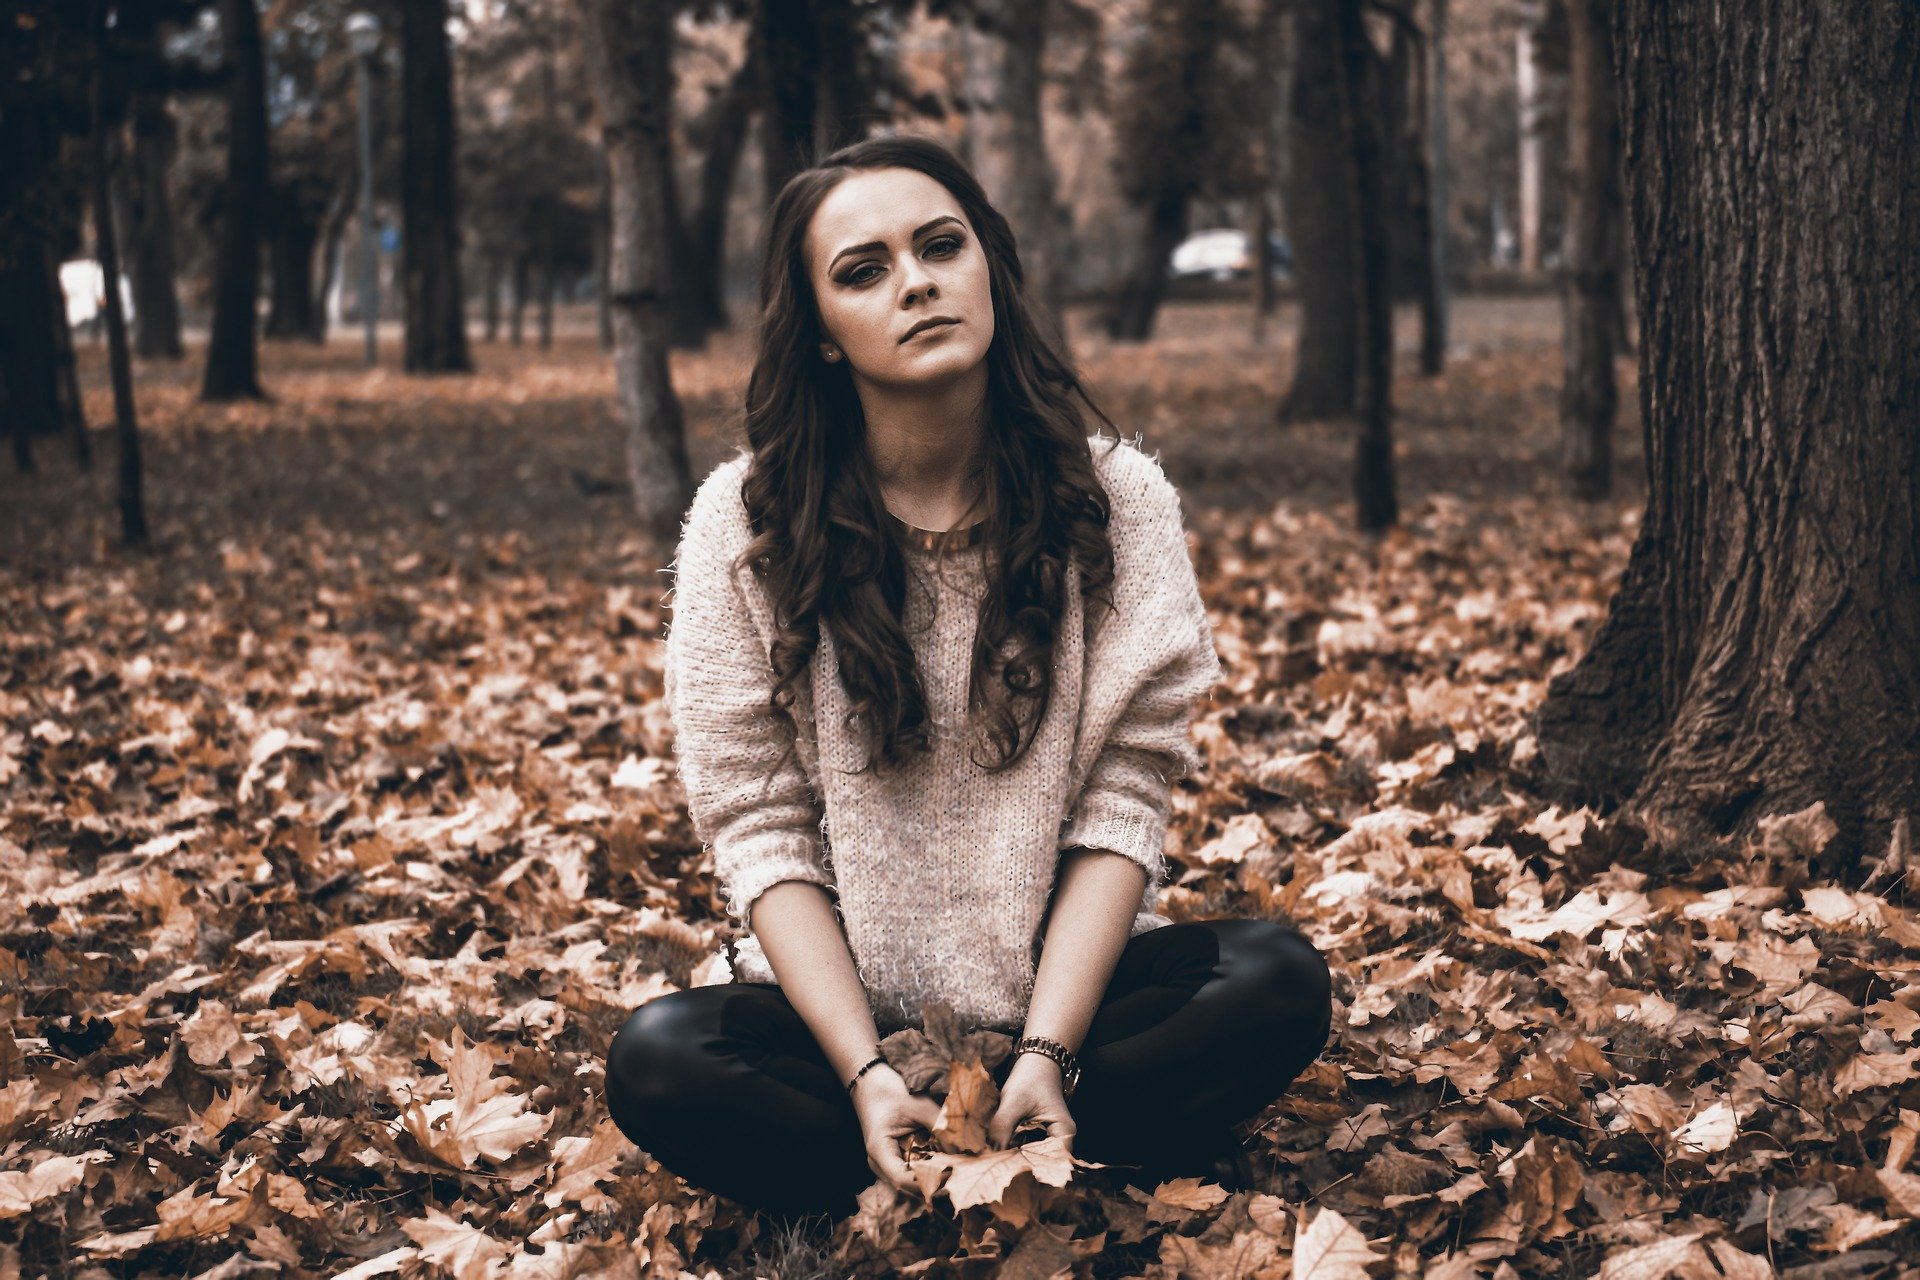 A photo of a teenage girl sitting in the park